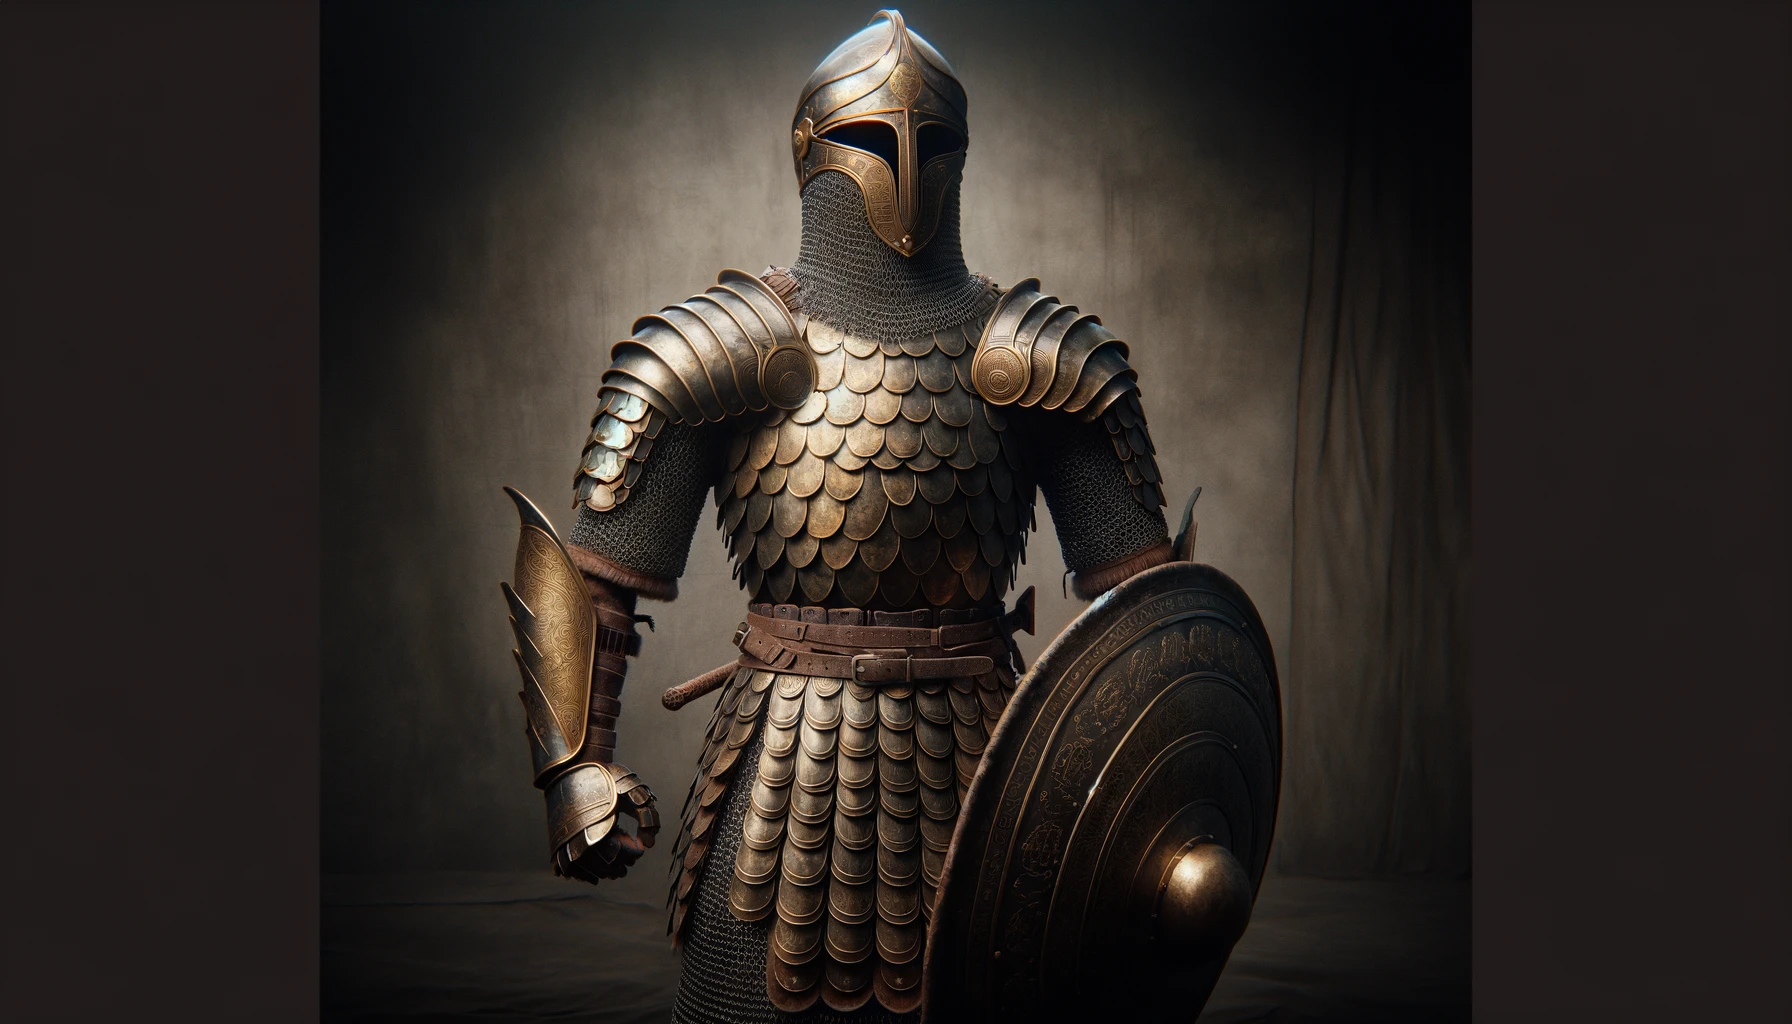 Armor and Protective Gear of Mesopotamian Soldiers